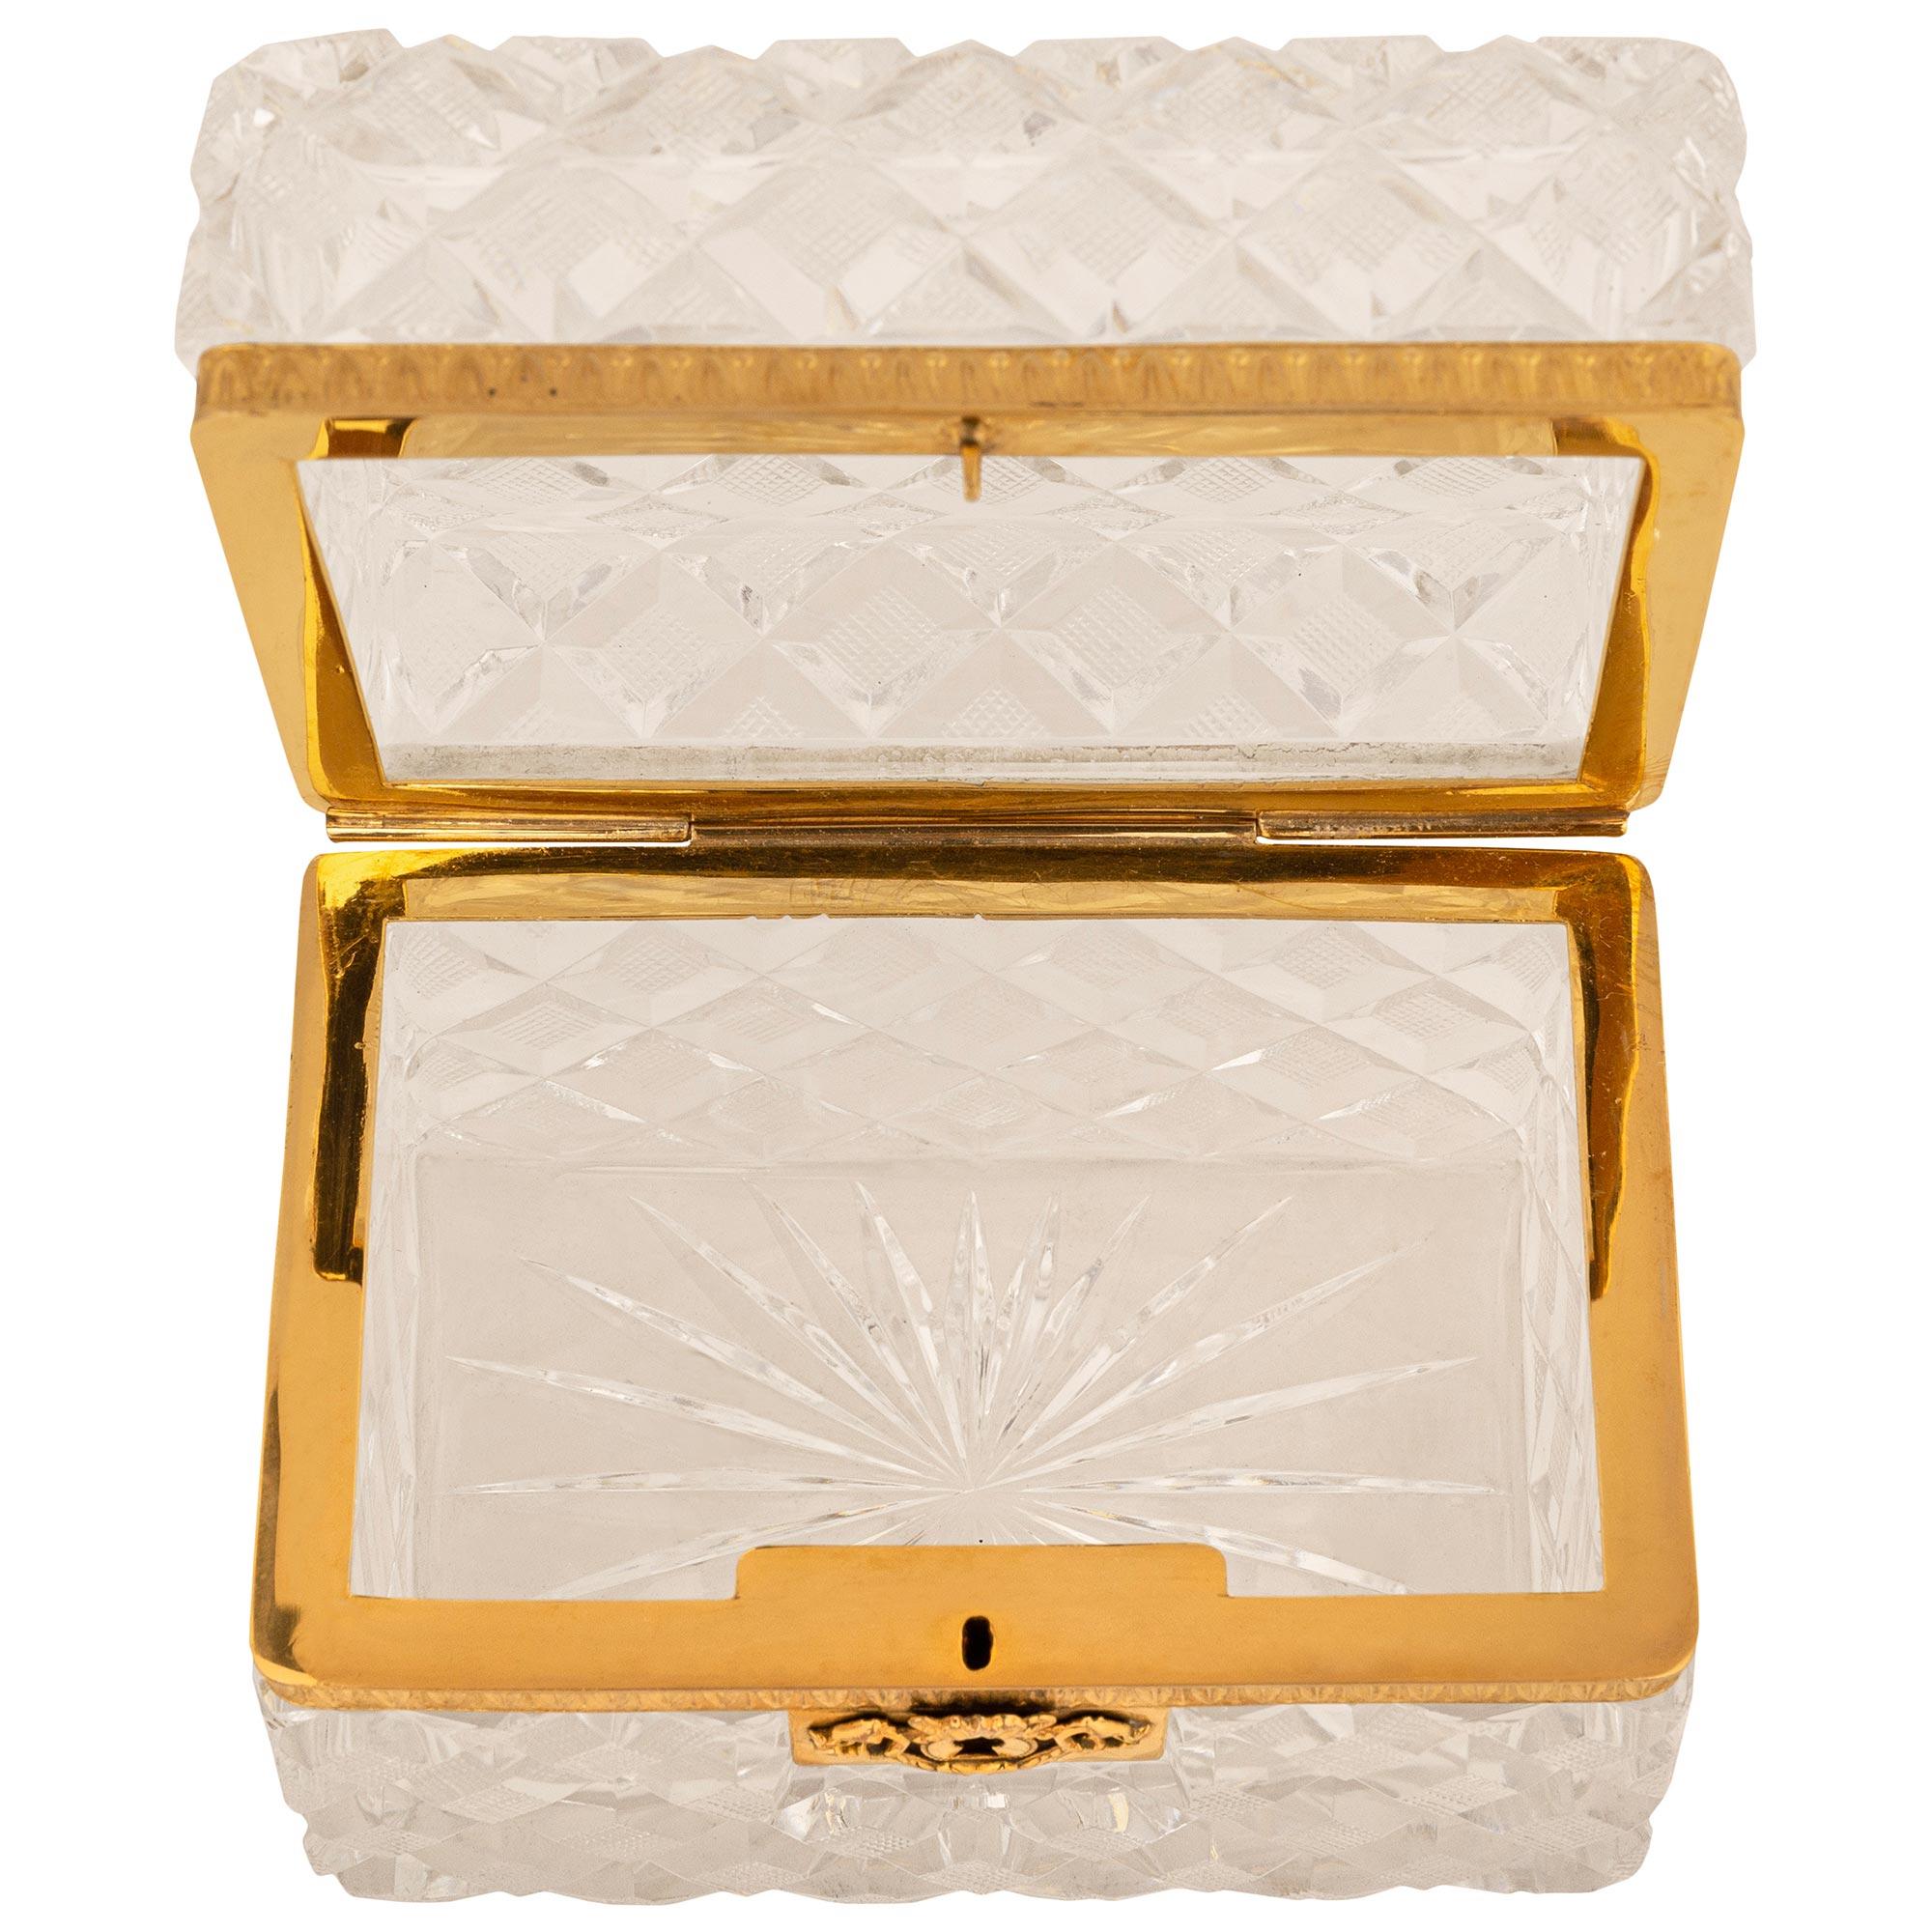 A stunning and finely detailed French 19th century Neo-Classical st. Ormolu and Crystal box. This beautiful Crystal box displays a wonderful thick Crystal body with lattice designed cuts and a scrolling foliate designed Ormolu keyhole escutcheon.